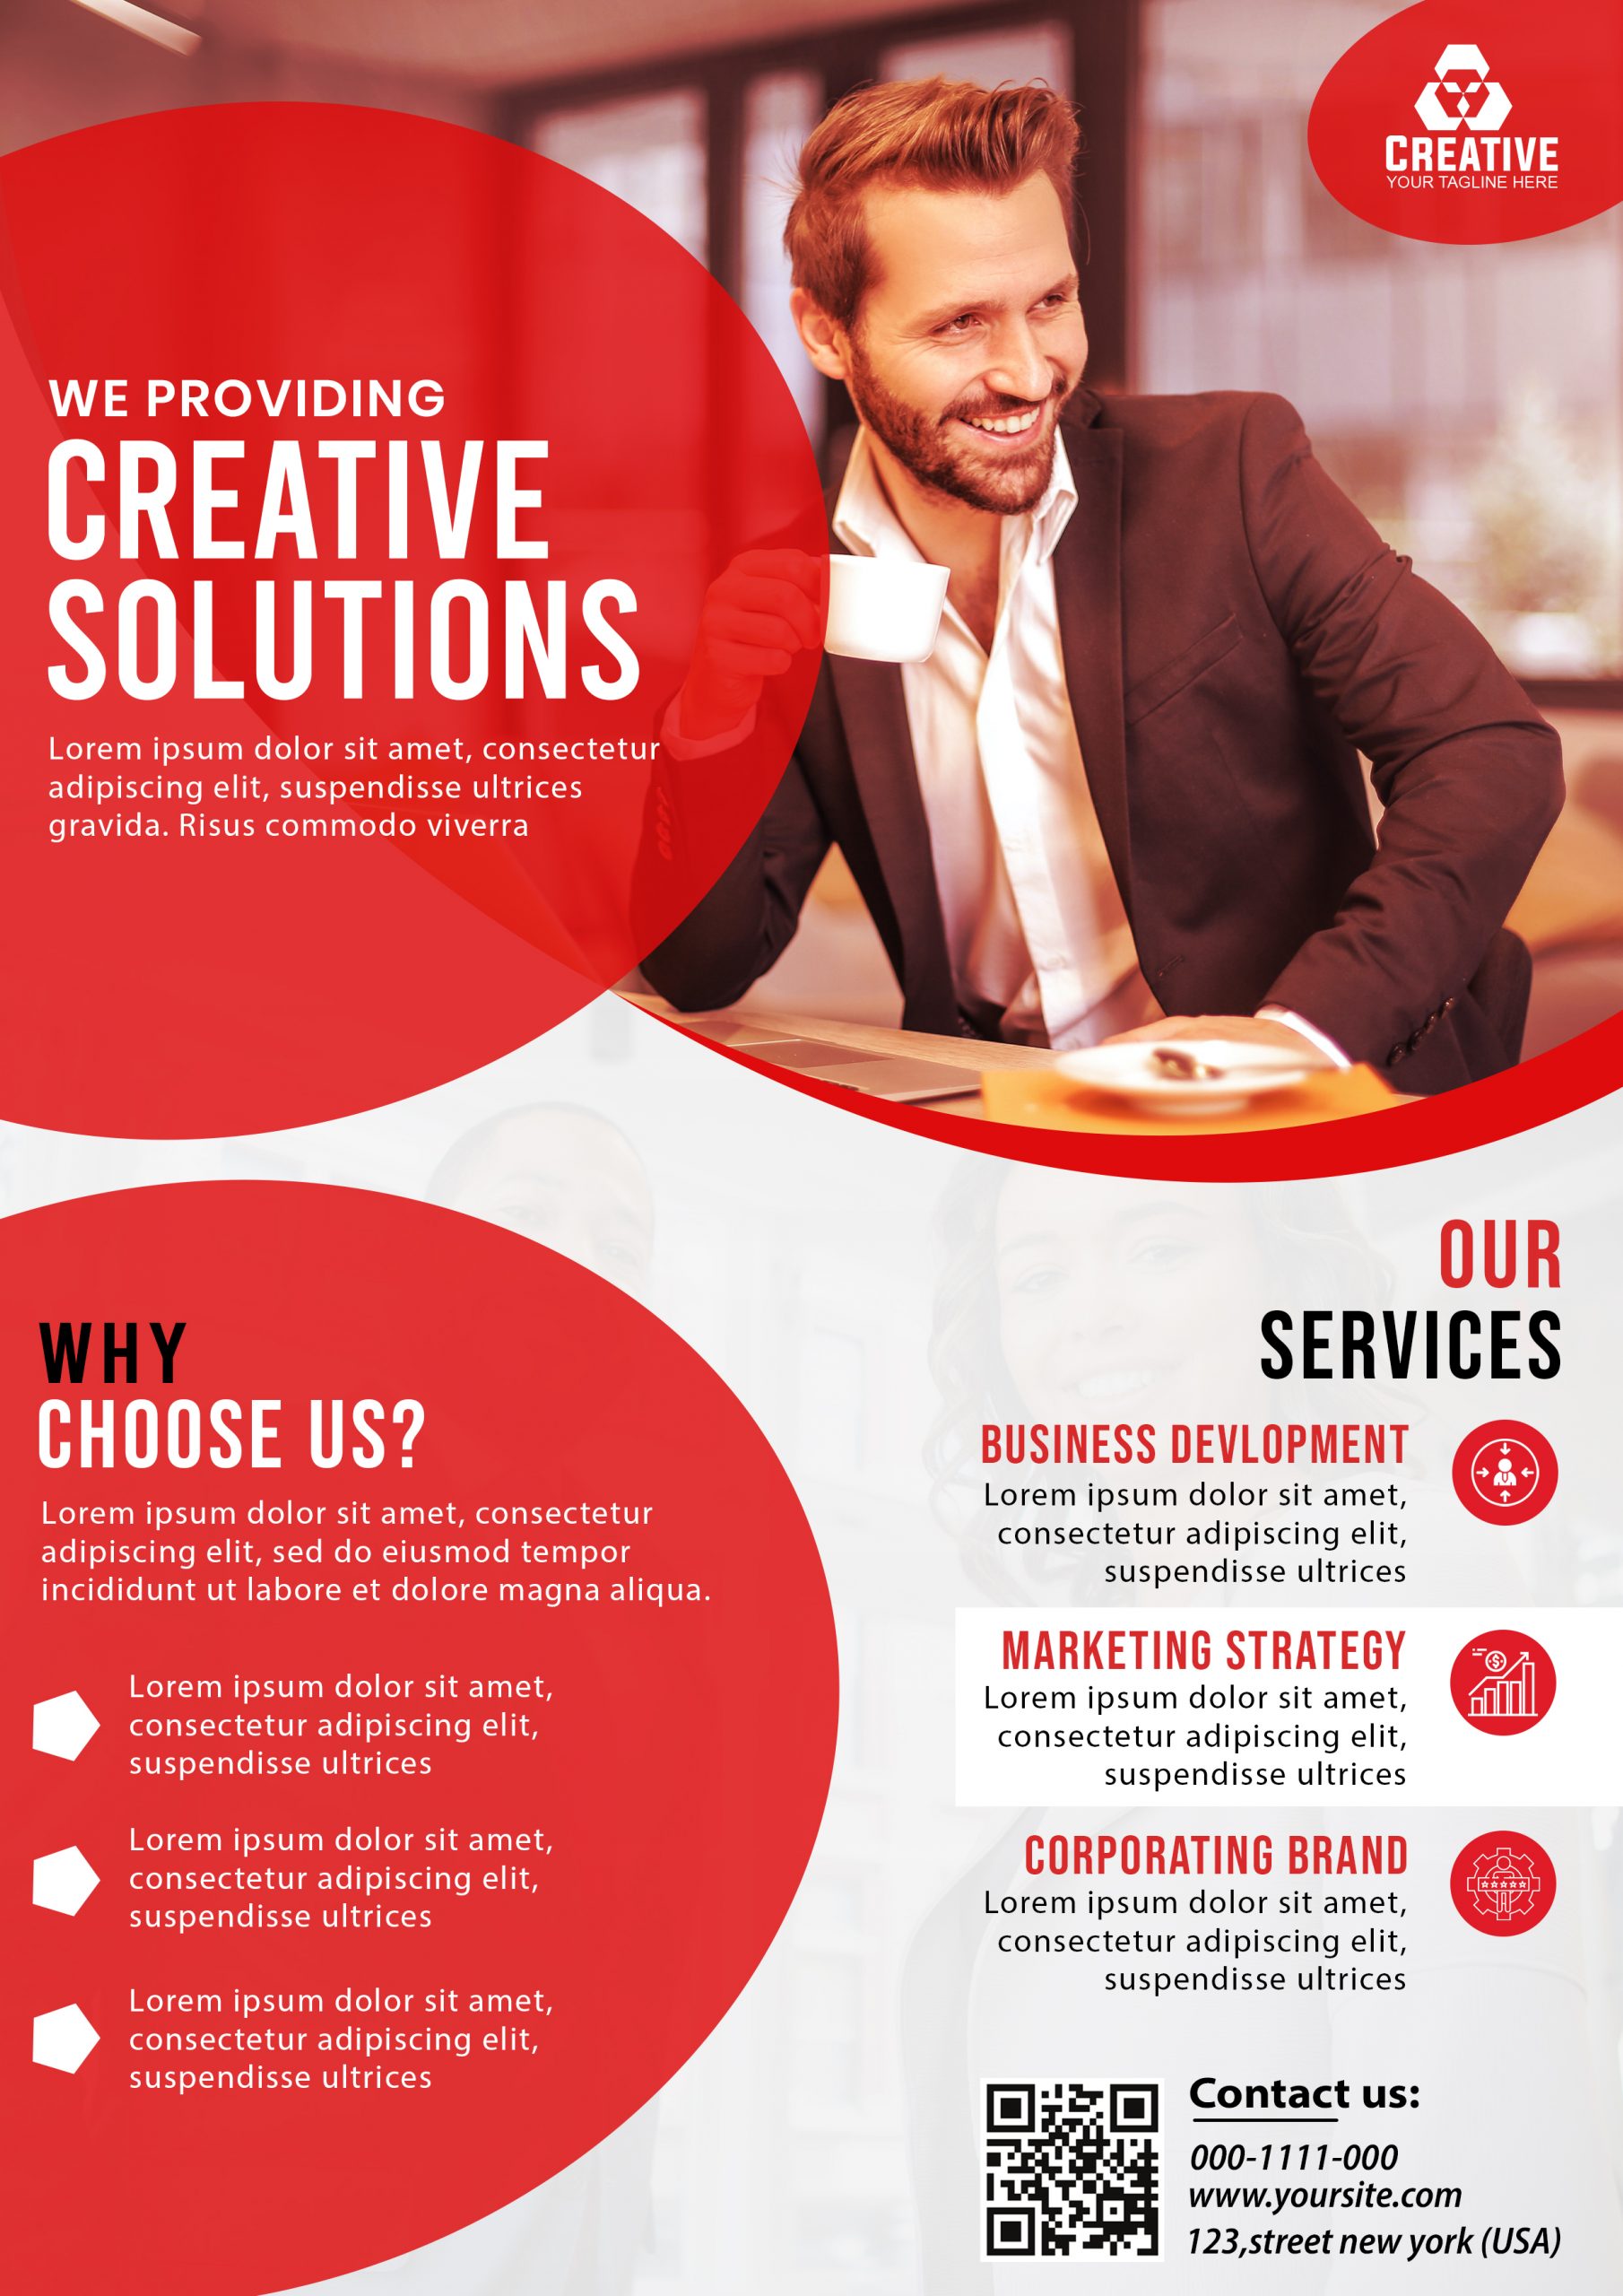 Creative Corporate Flyer PSD Free Download.jpg2